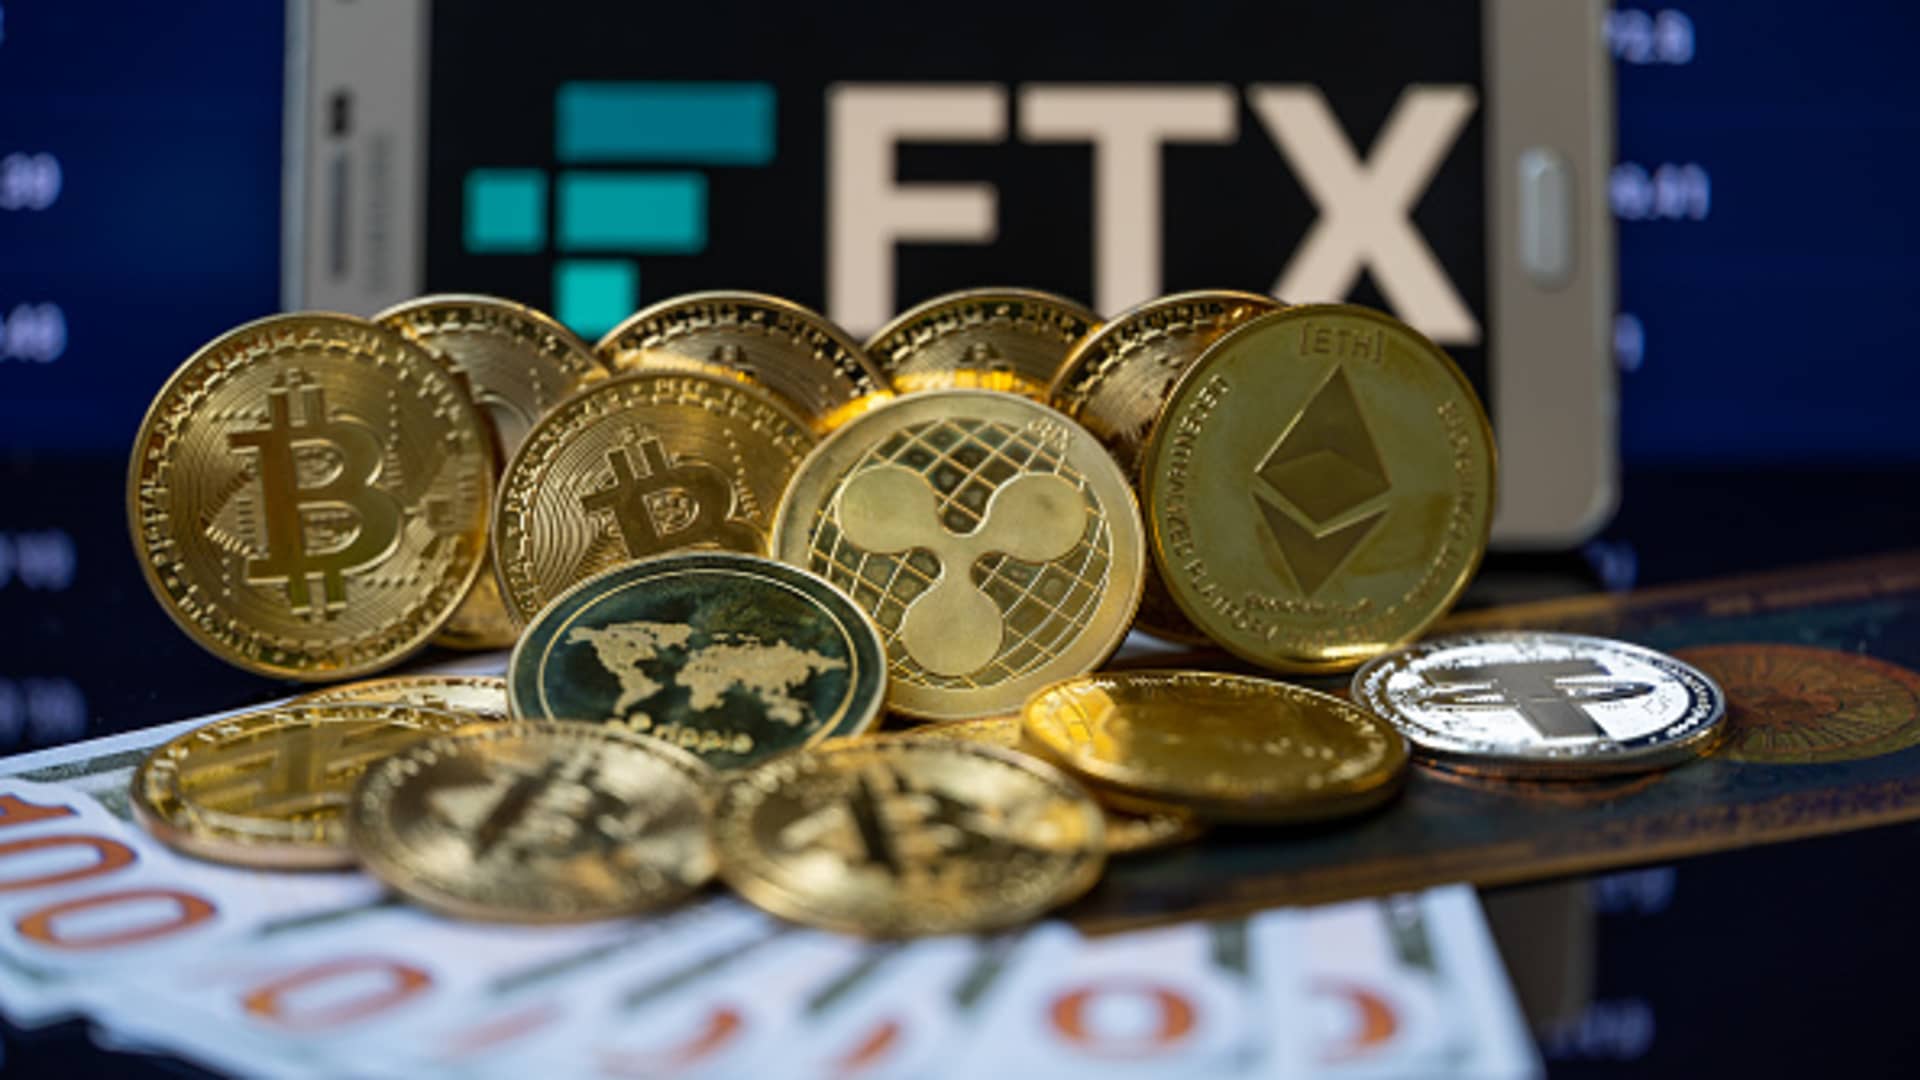 4 lessons for cryptocurrency investors from the FTX collapse